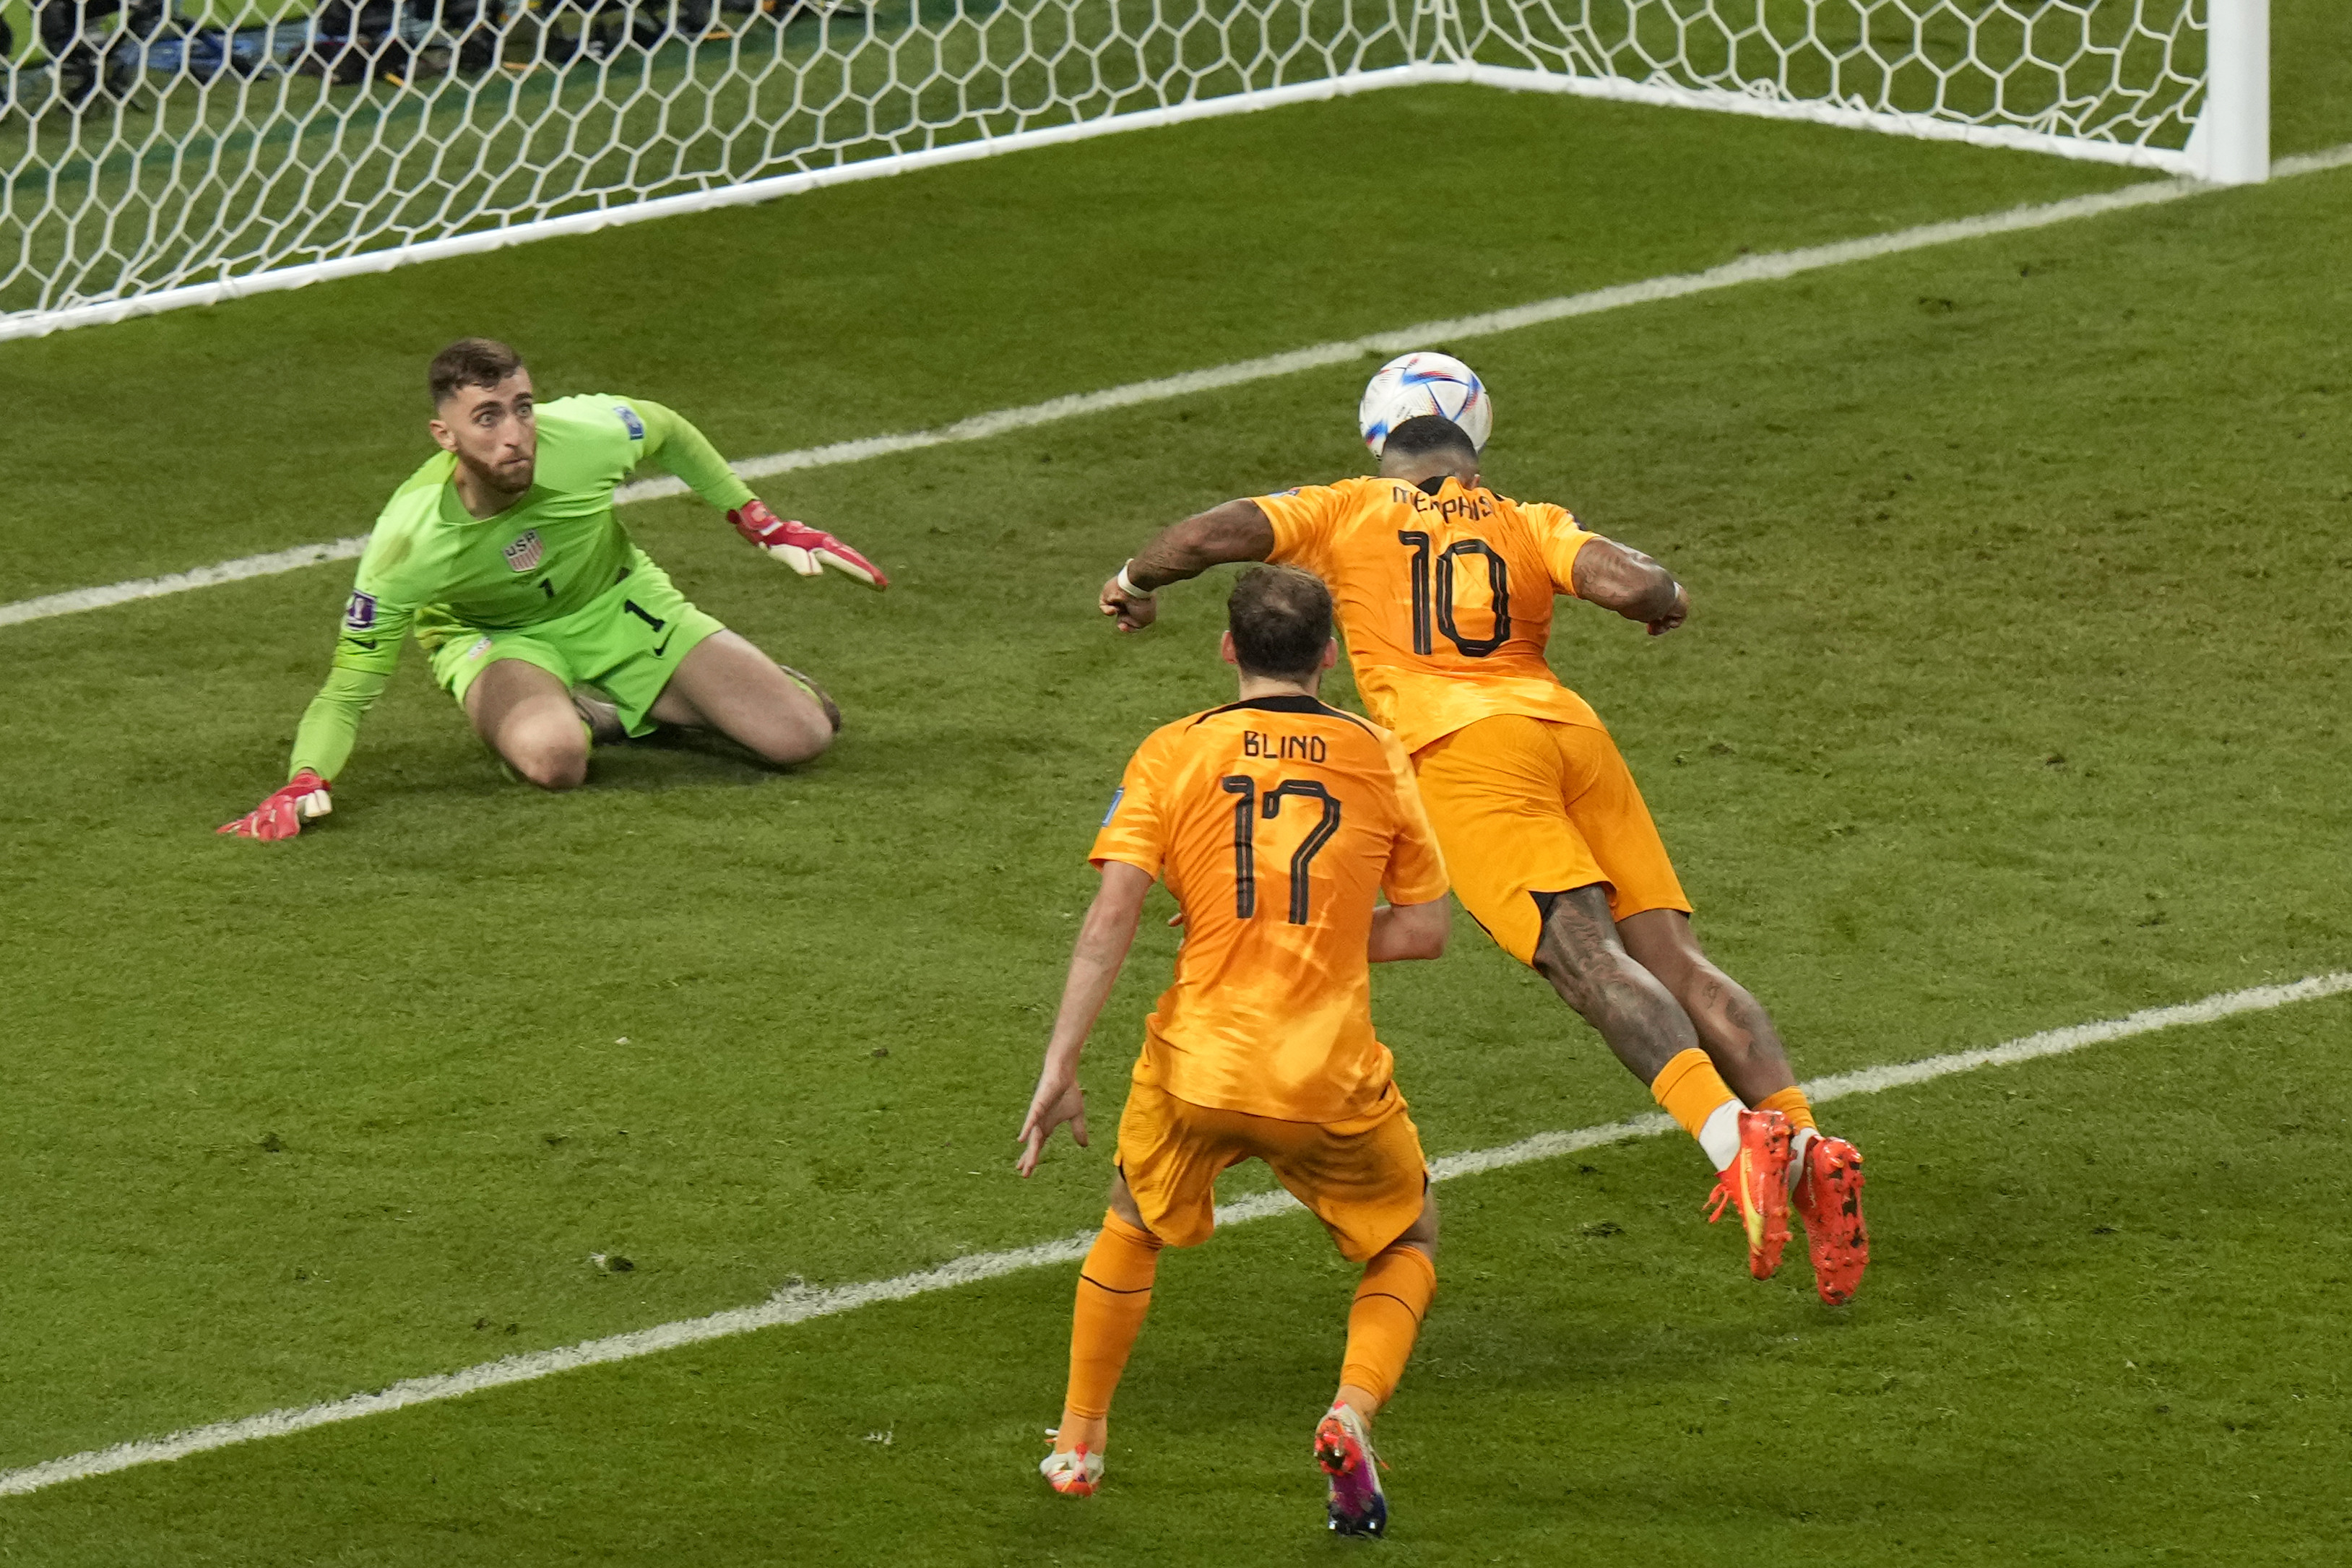 Pragmatic style pays off for Netherlands